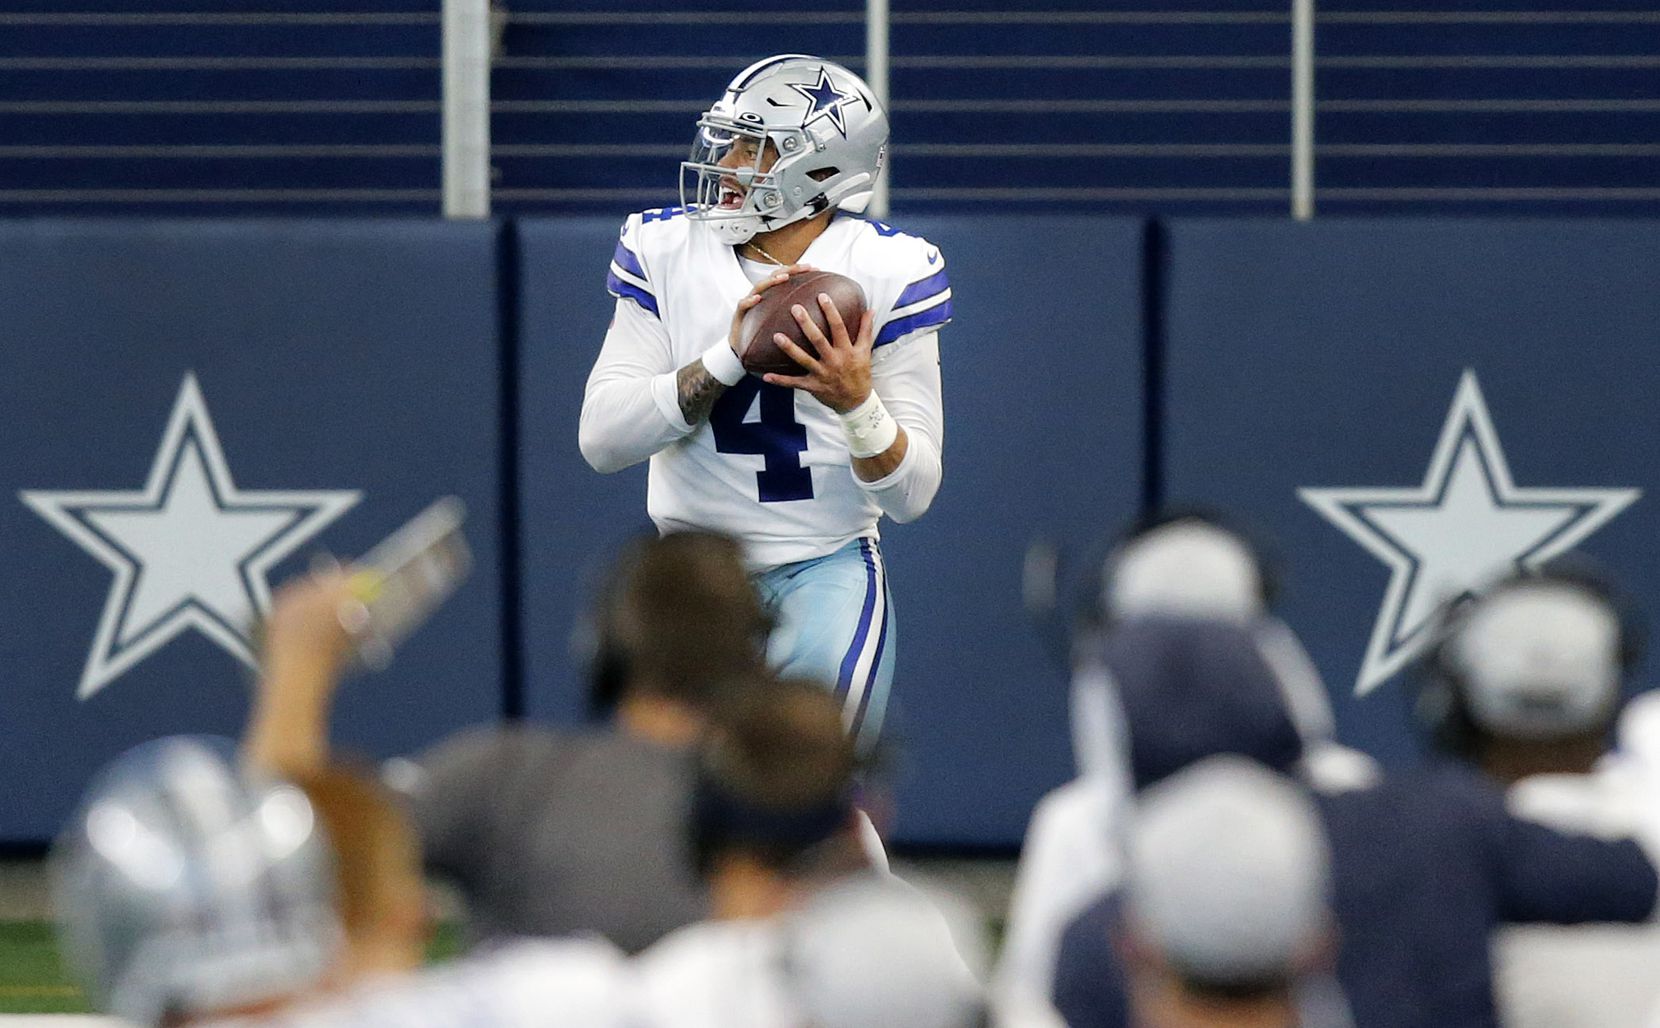 Dallas Cowboys quarterback Dak Prescott (4) catches a touchdown pass against the New York Giants during the second quarter at AT&T Stadium Stadium in Arlington, Texas, Sunday, October 11, 2020. (Tom Fox/The Dallas Morning News)